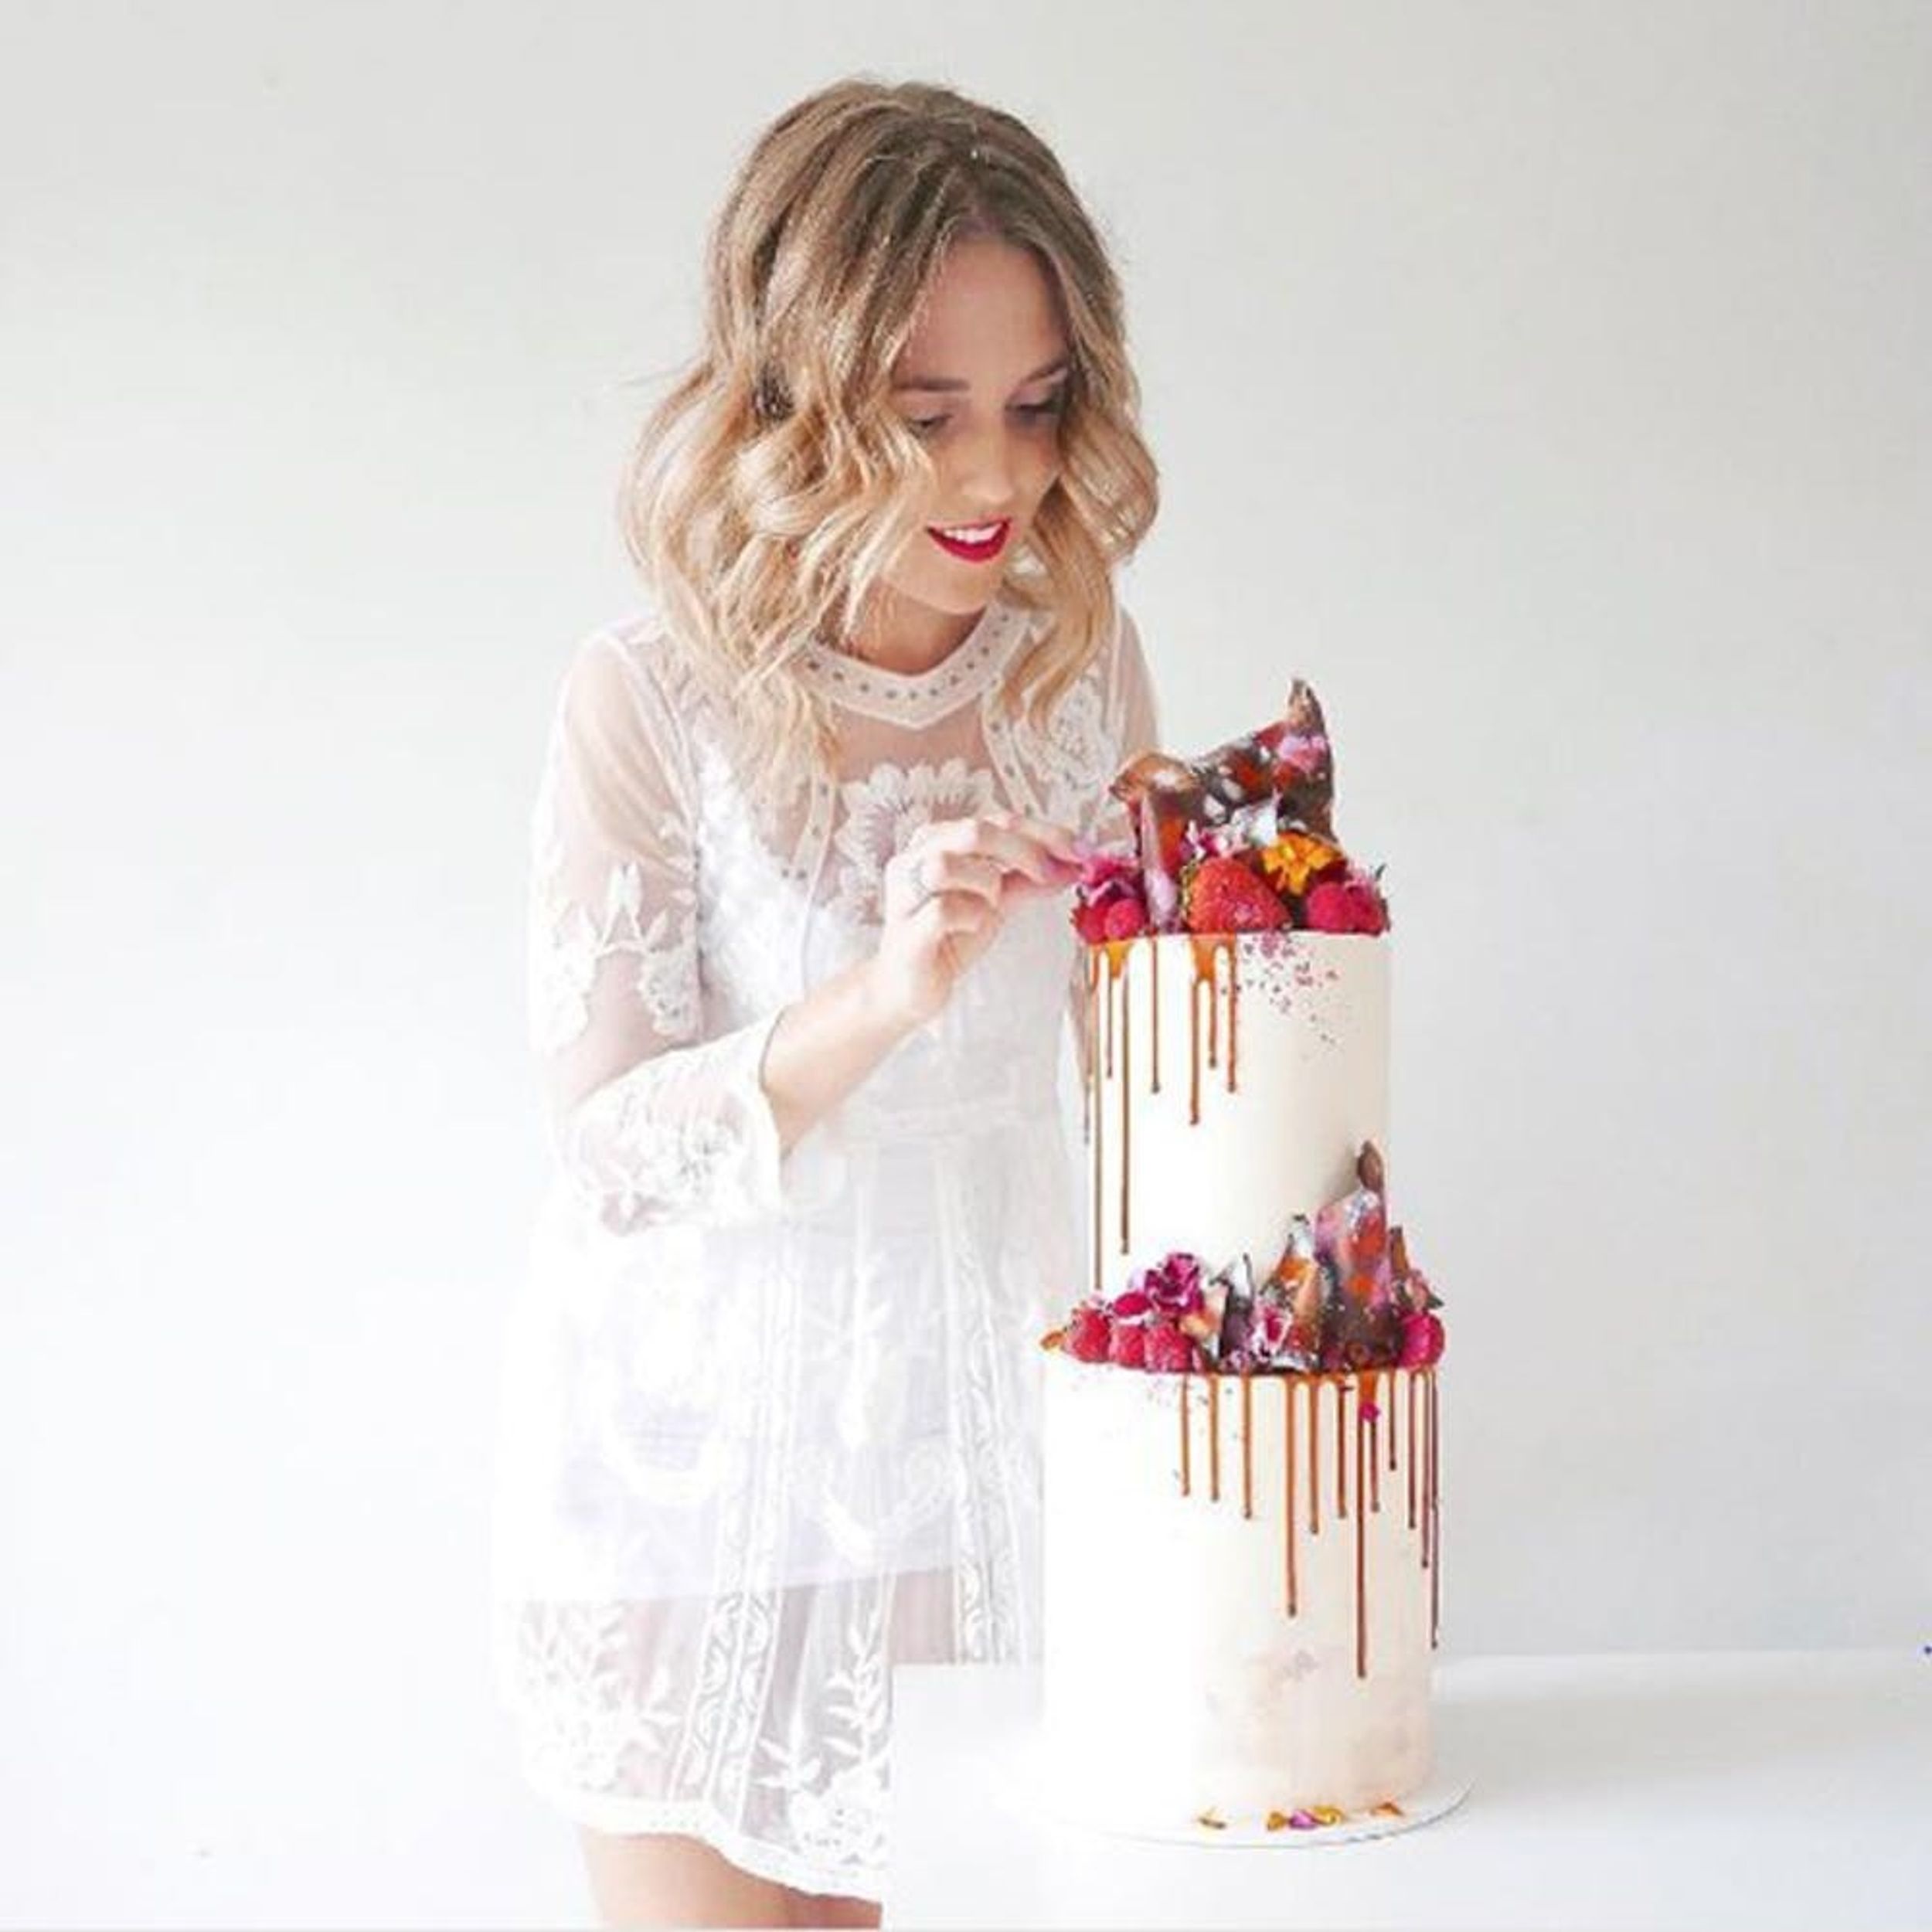 21 Wedding Cake Bakers Every Bride Needs to Follow on Instagram